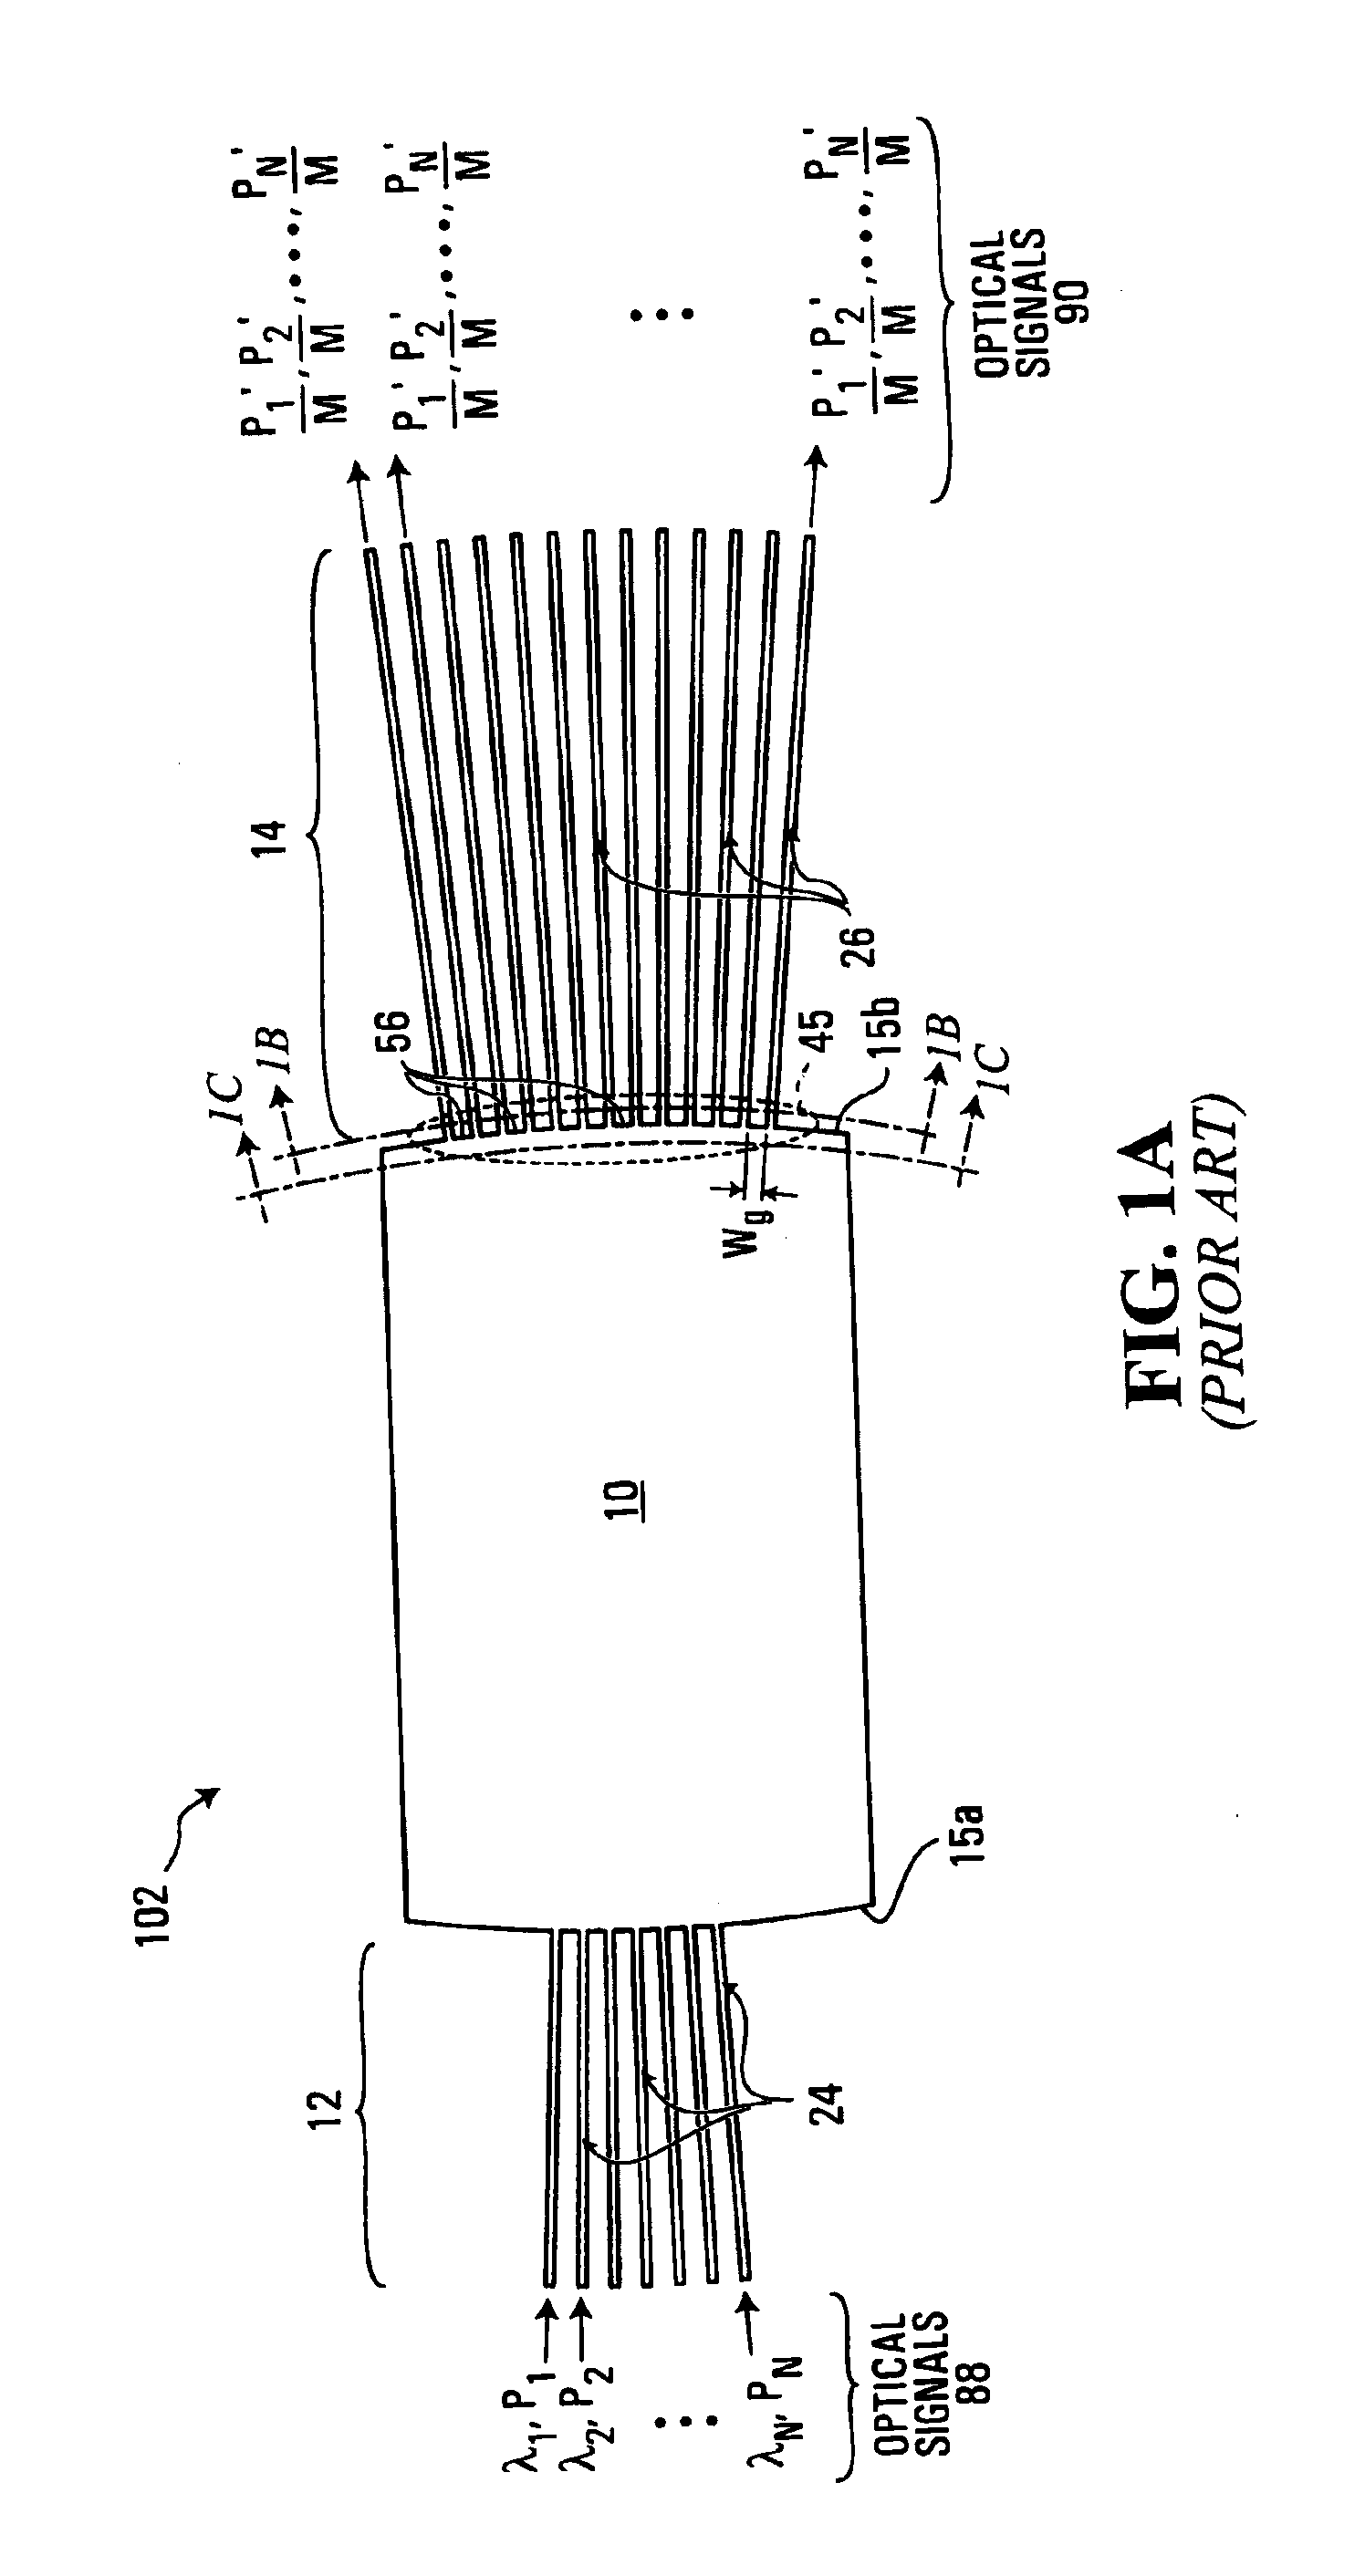 Optical coupling arrangement having low coupling loss and high production yield